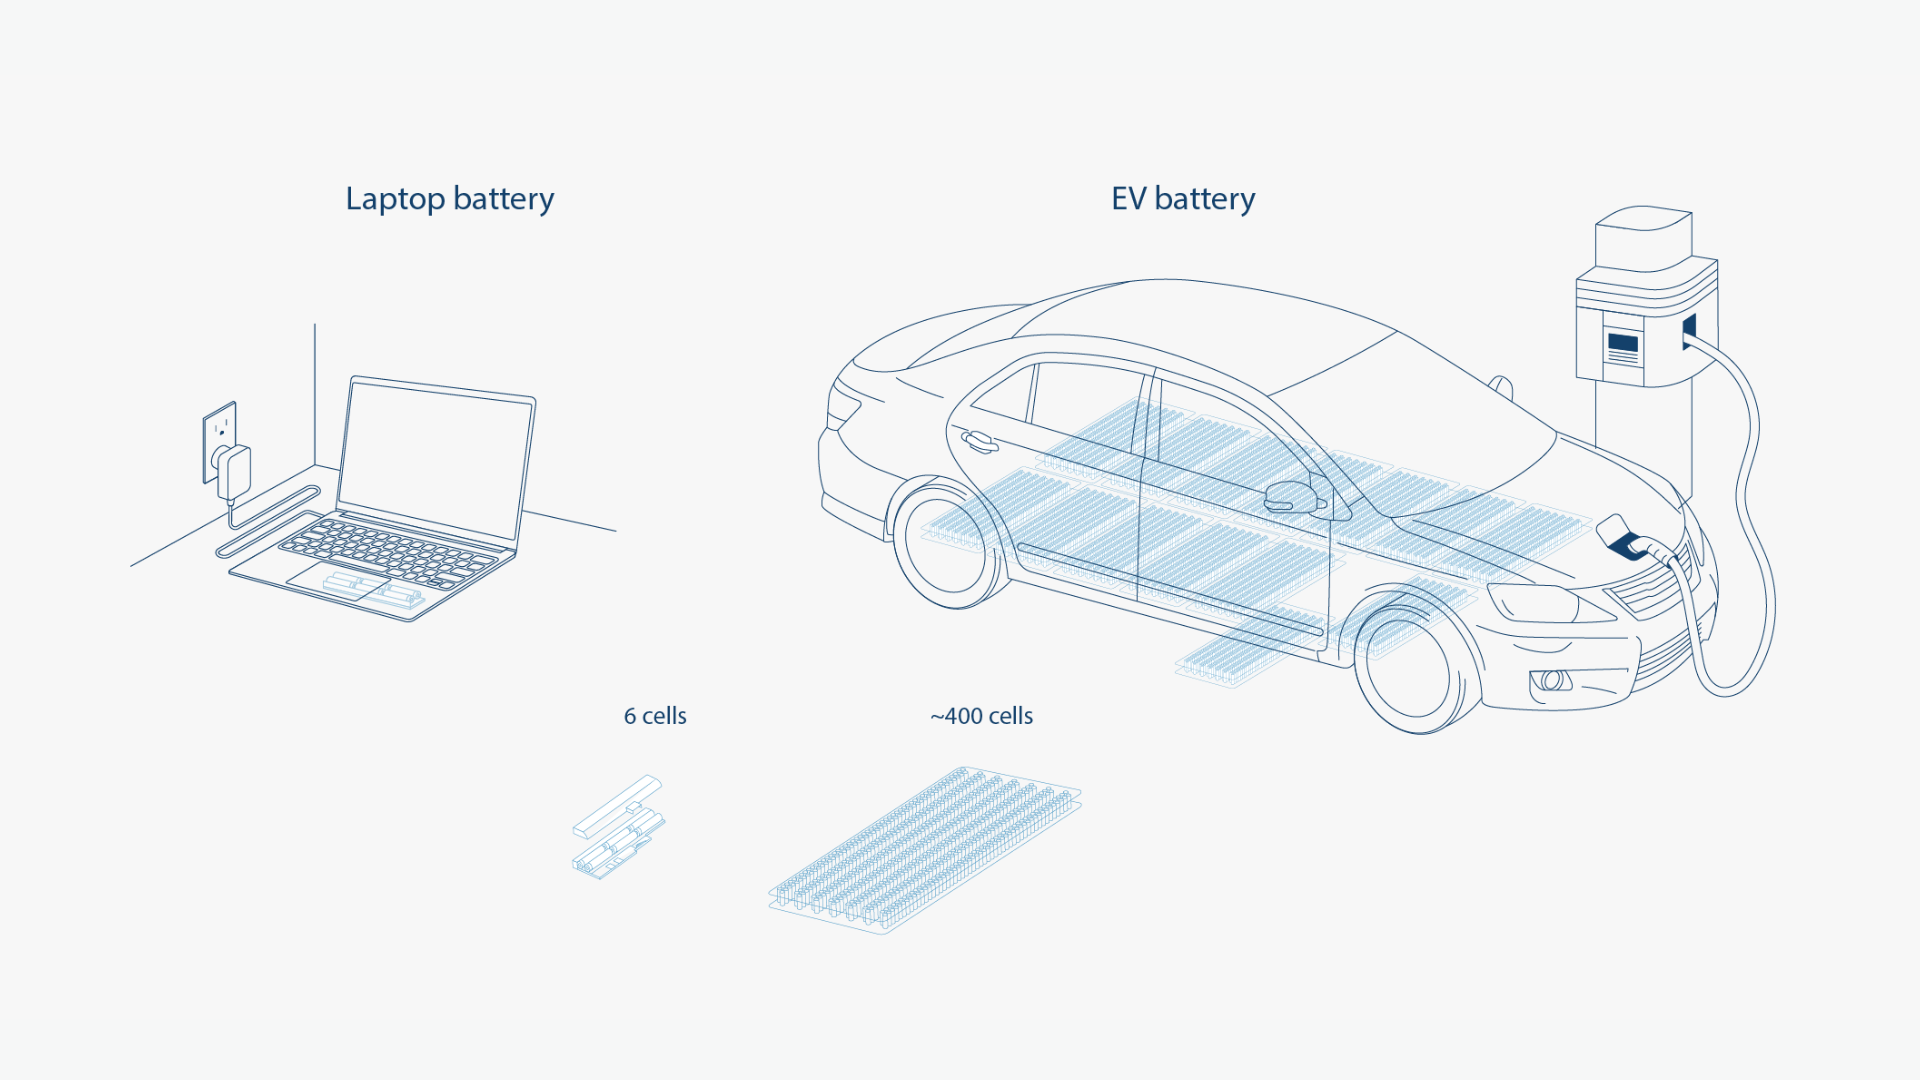 Comparing the methods of charging a laptop and an EV